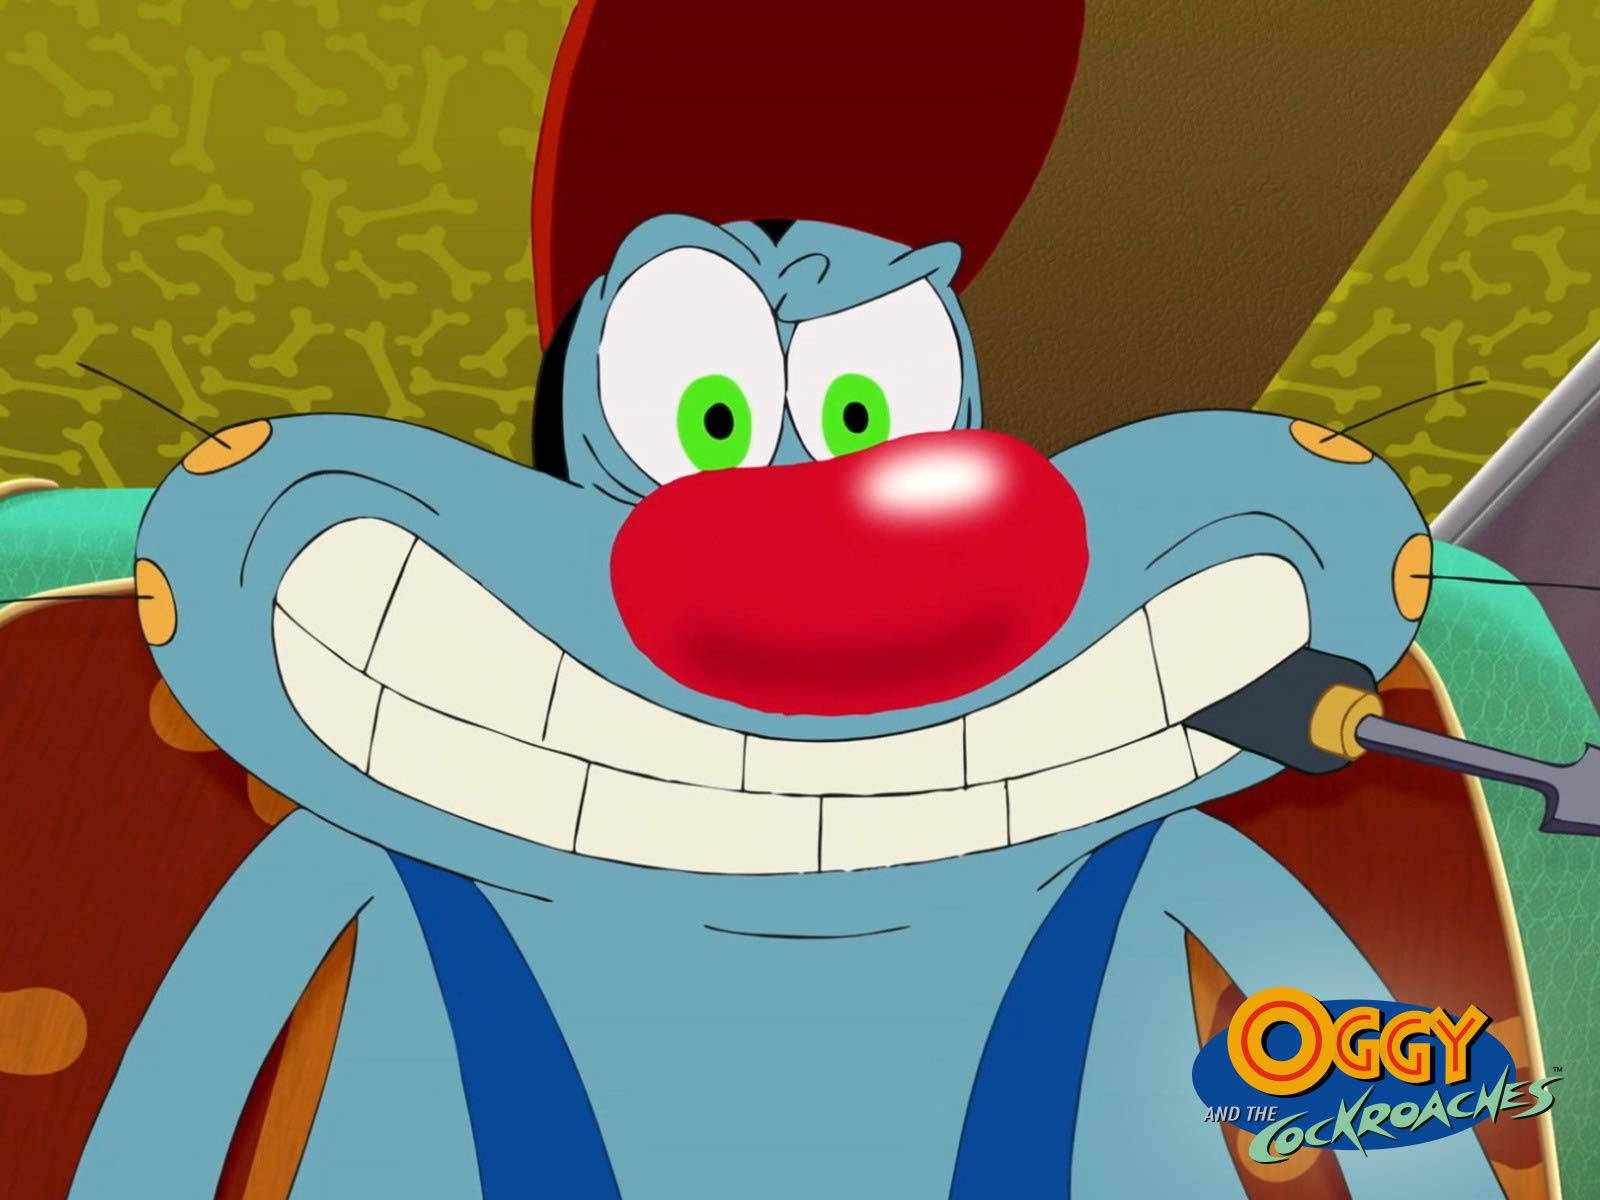 Download Oggy And The Cockroaches Screwdriver Wallpaper 